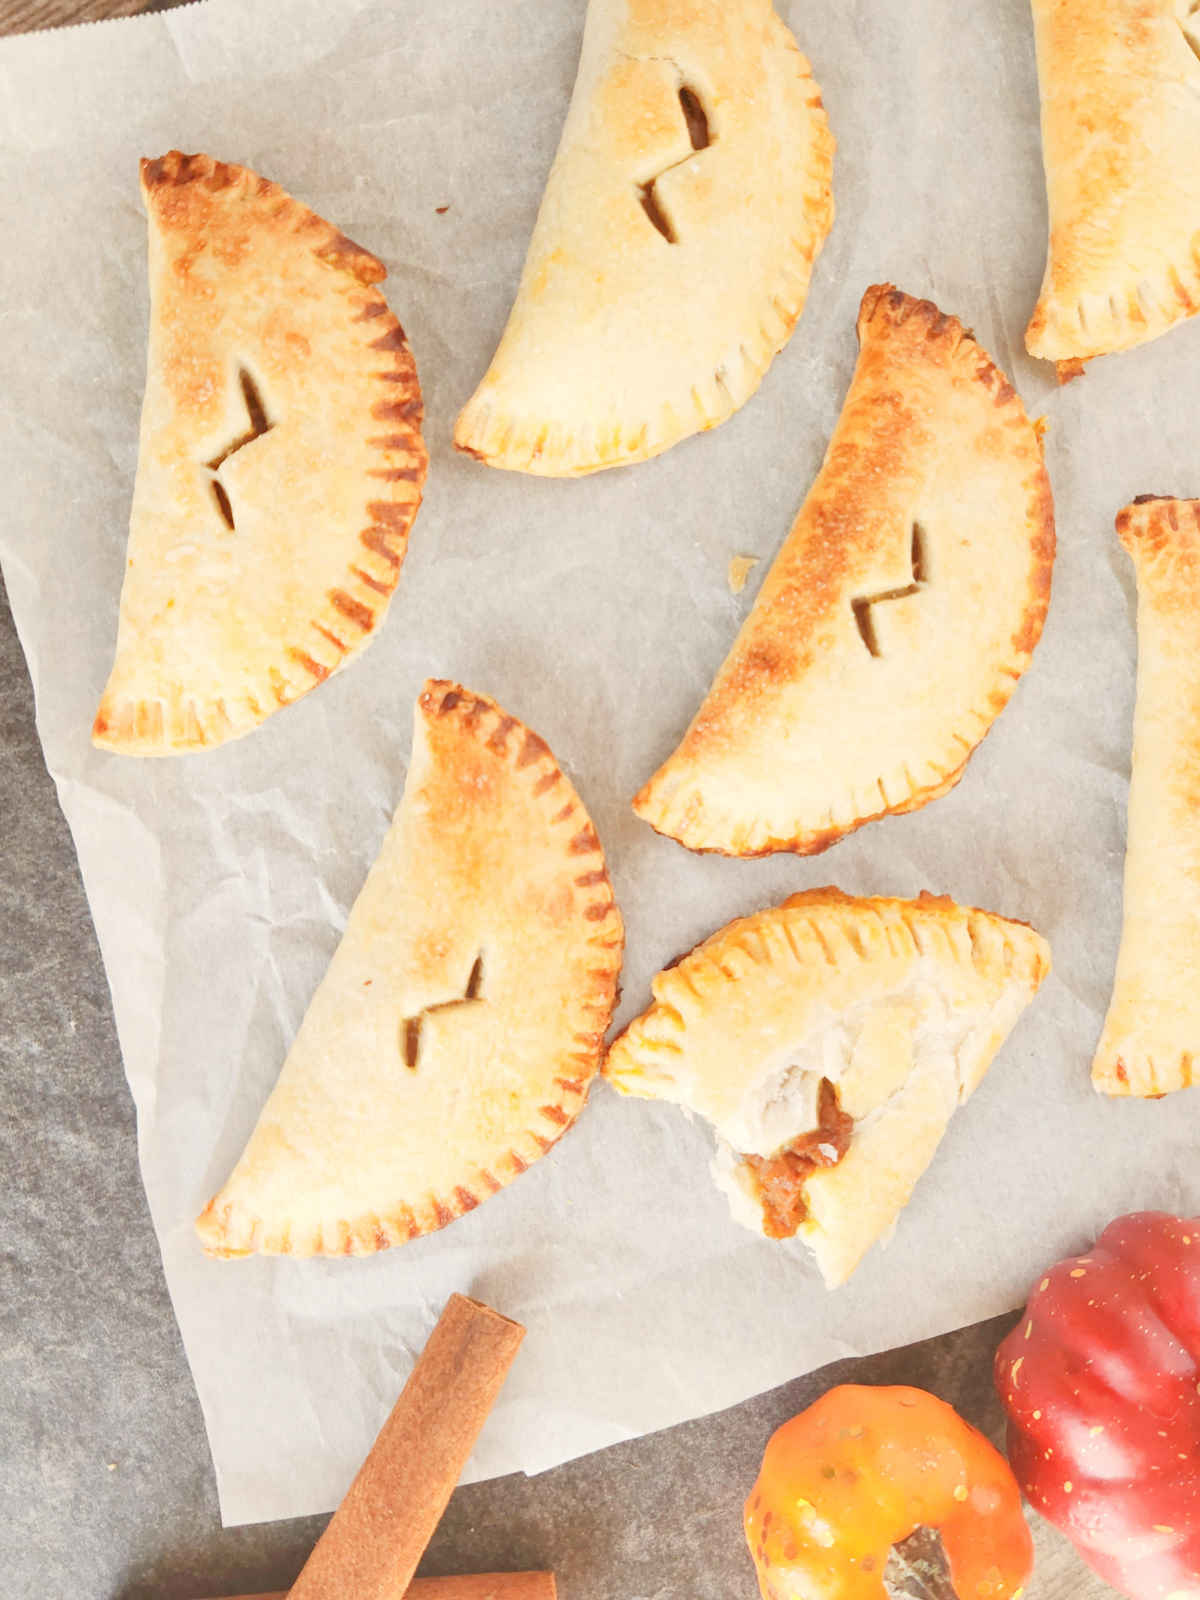 Harry Potter Inspired Pumpkin Pasties Recipe - Play Party Plan